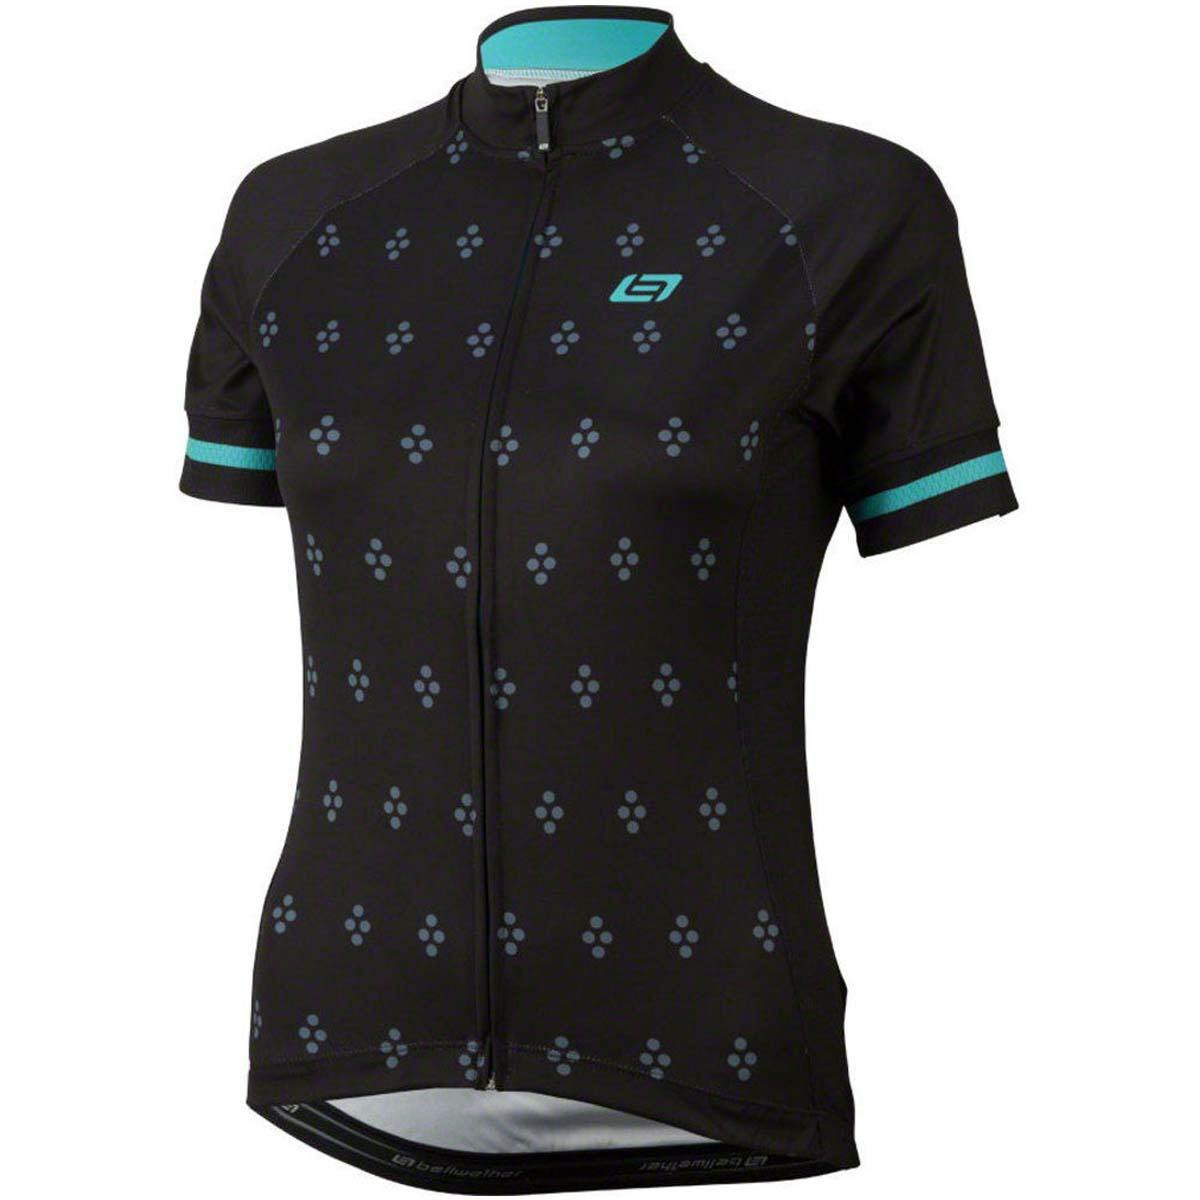 Bellwether Essence Women's Cycling Jersey - Black - Large